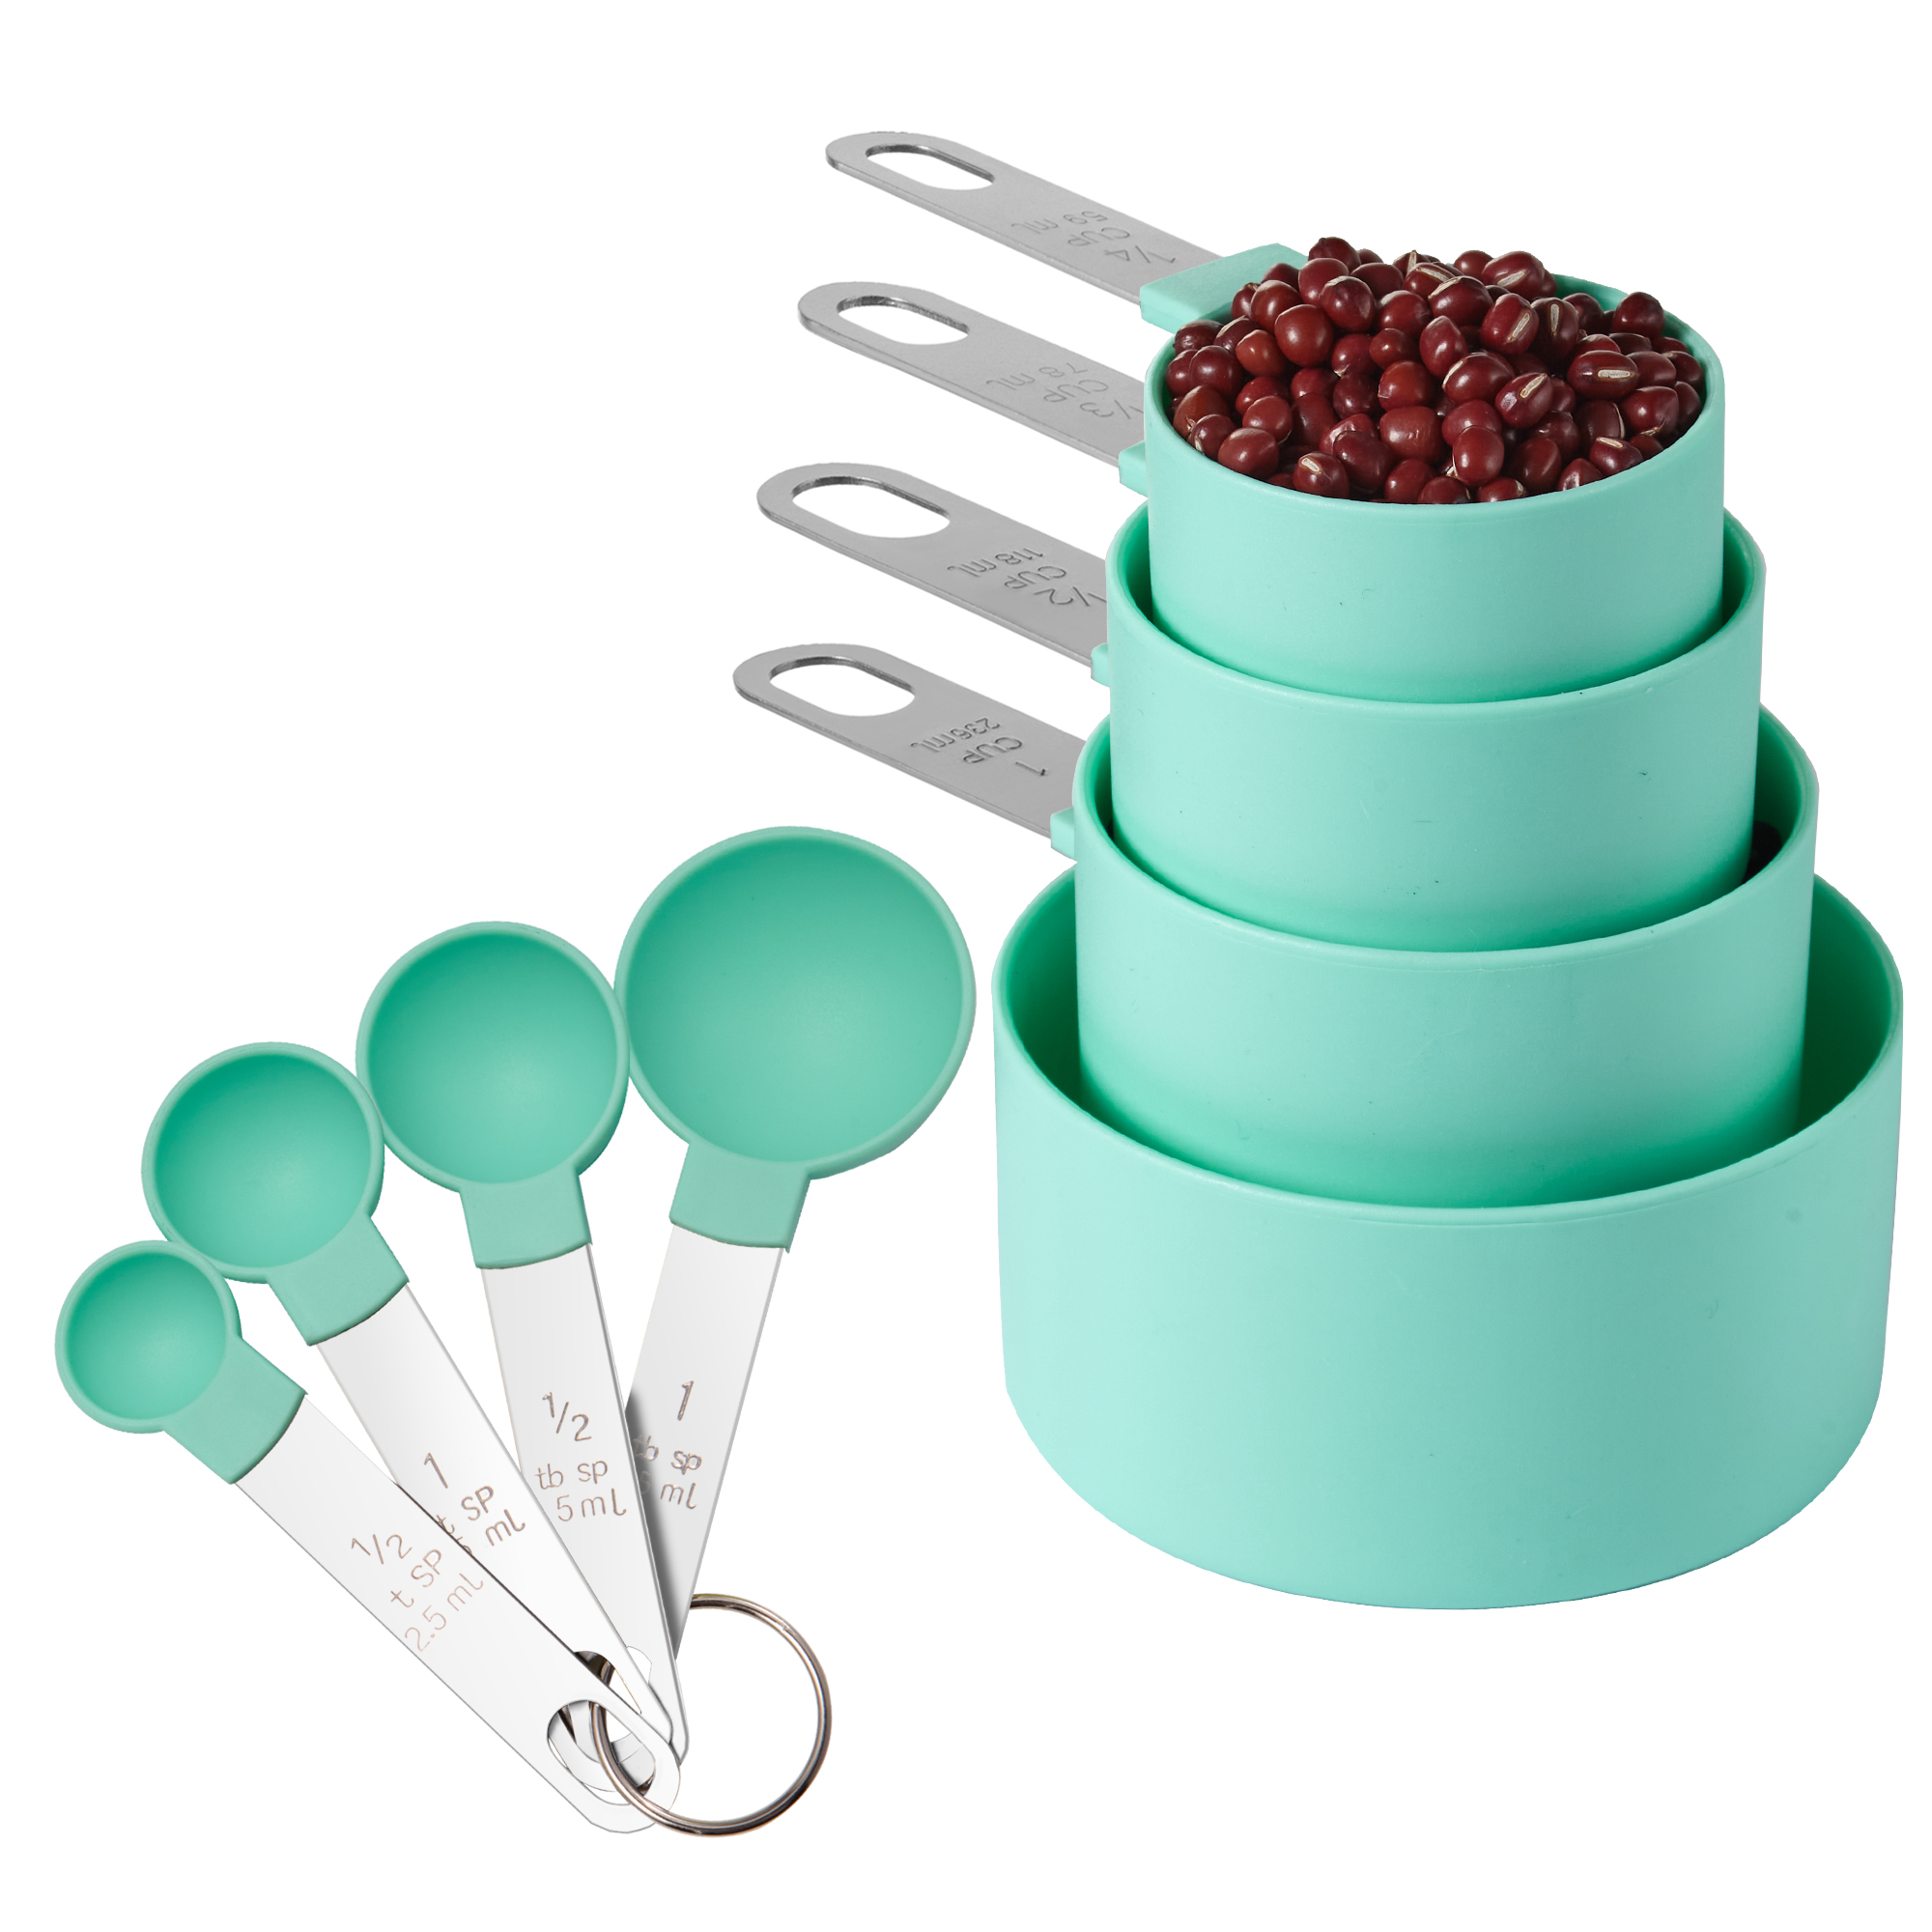 Chef Craft 8pc Plastic Measuring Cups & Spoons Set - 1/4 tsp, 1/2 tsp, 1  tsp, 1 tbsp, 1/4 cup, 1/3 cup, 1/2 cup and 1 cup Sizes